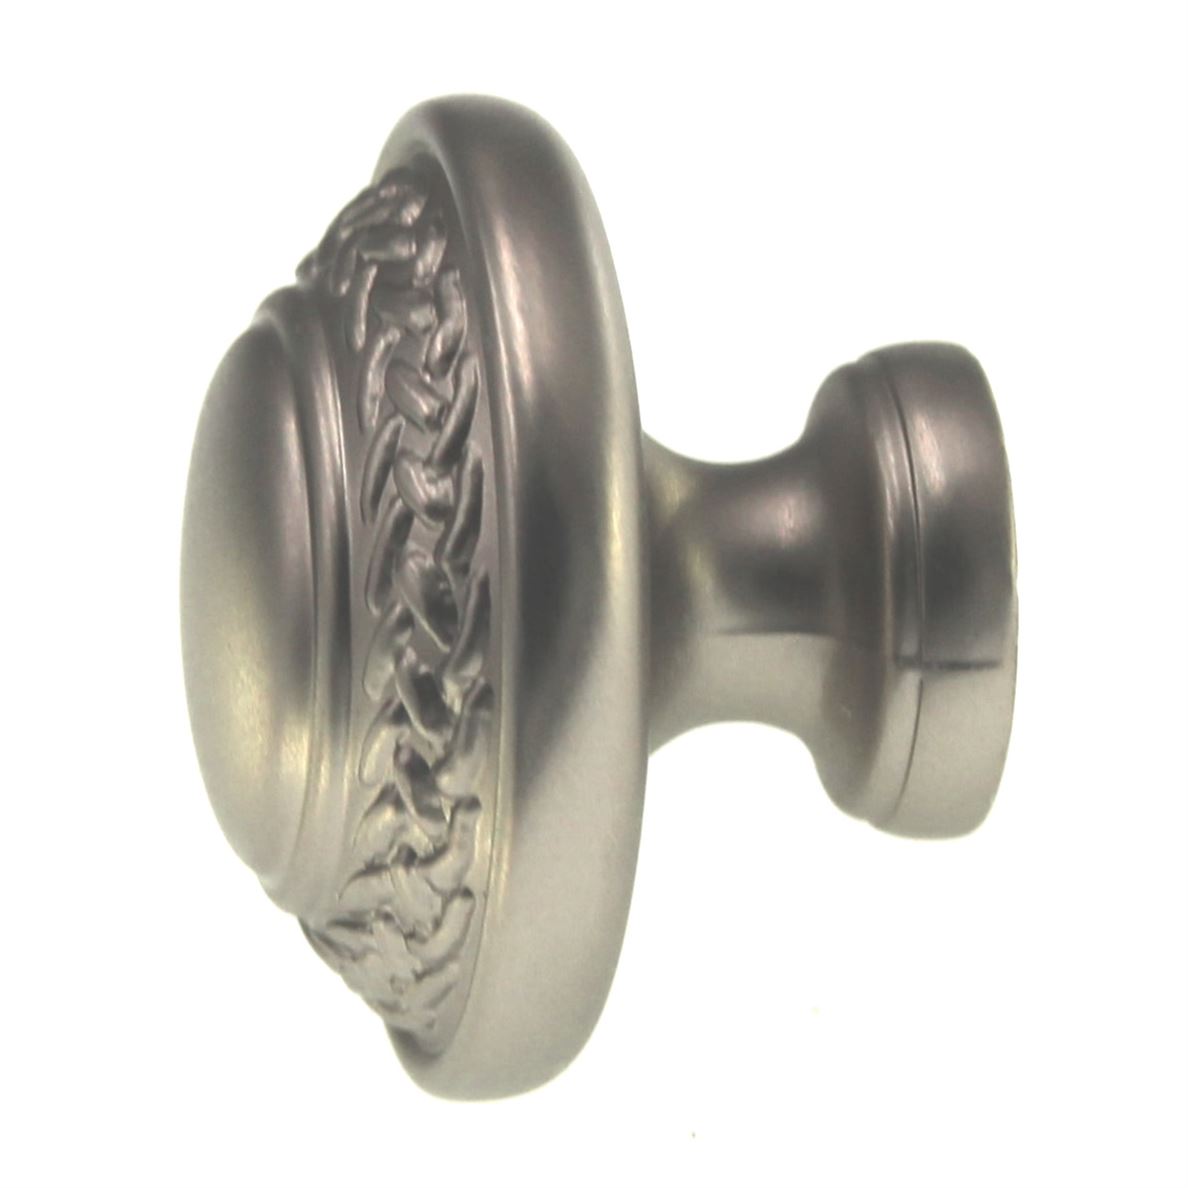 Hickory Hardware Guild Flat Nickel 1 5/16" Rope Cabinet Knob P3154-FN